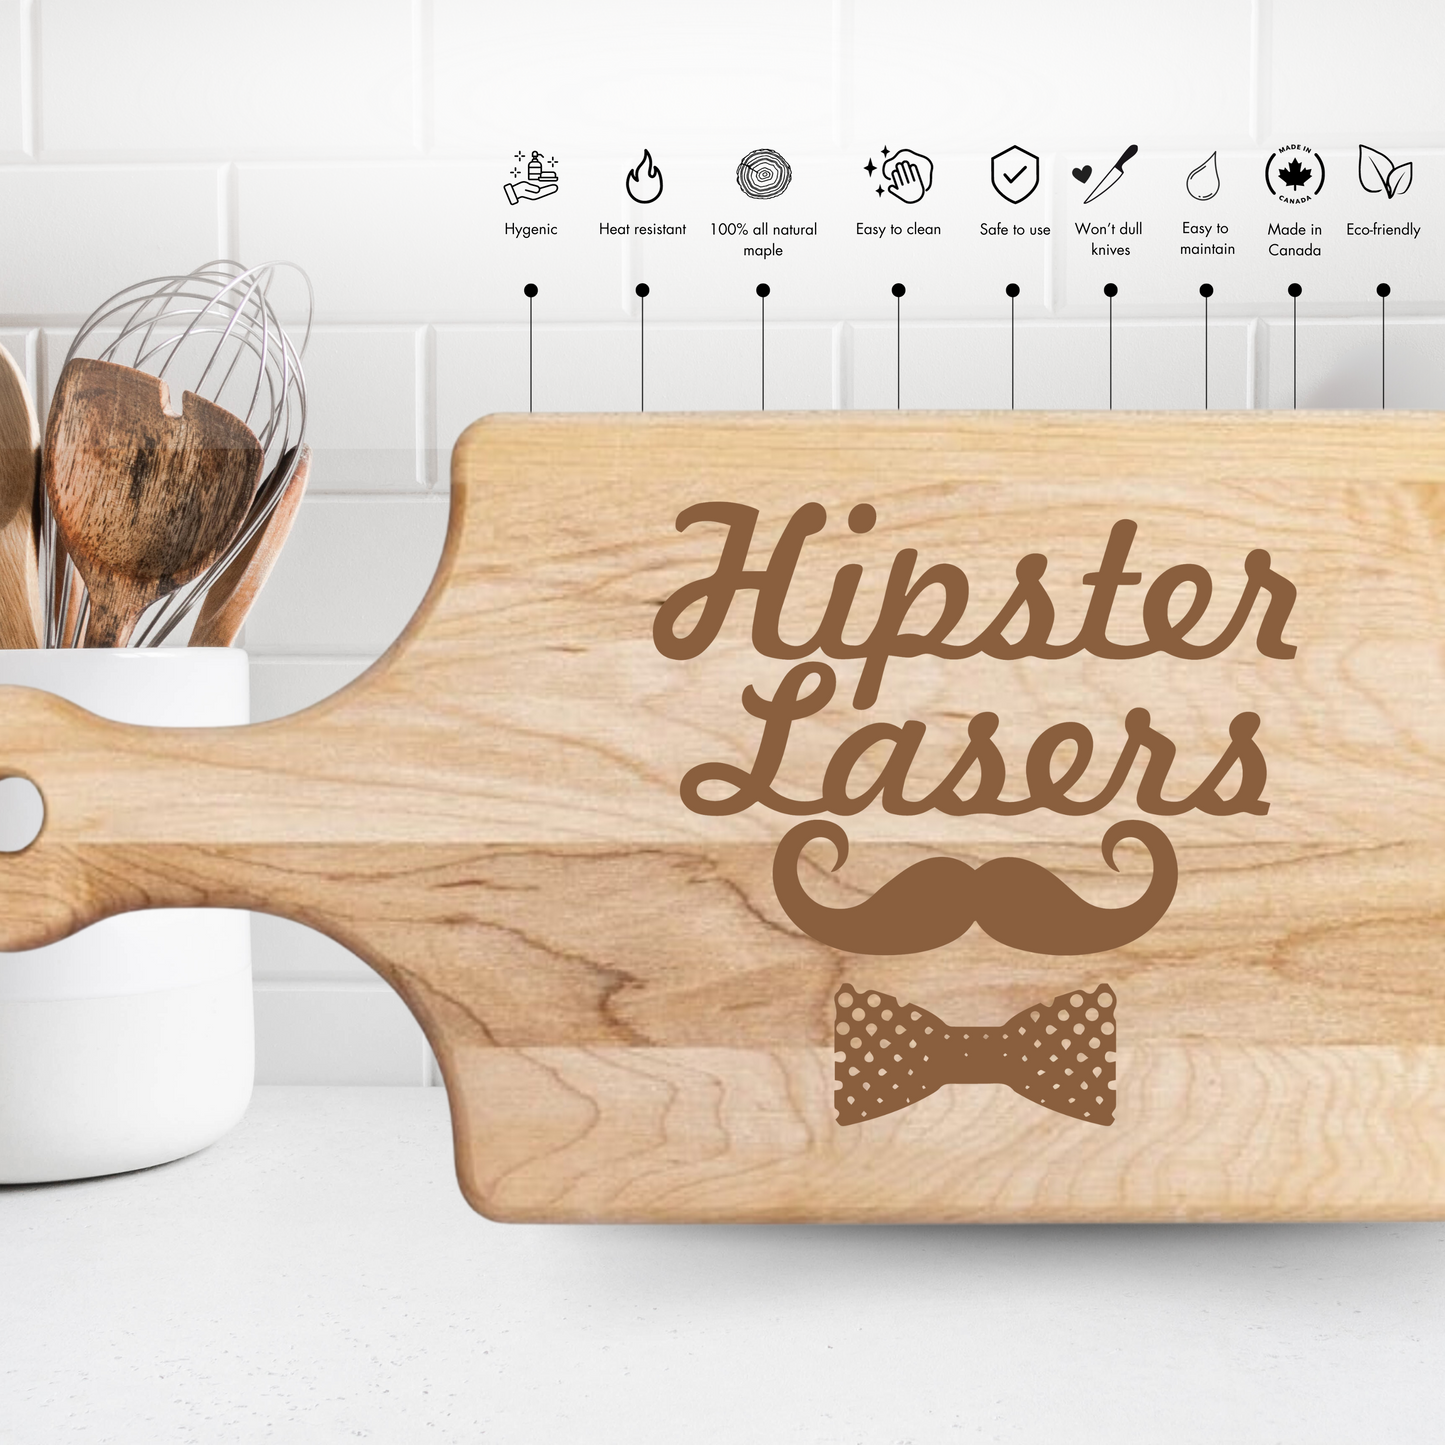 Stairway To Dinner Cutting Board - Premium Cutting Boards from Hipster Lasers - Just $40! Shop now at Hipster Lasers